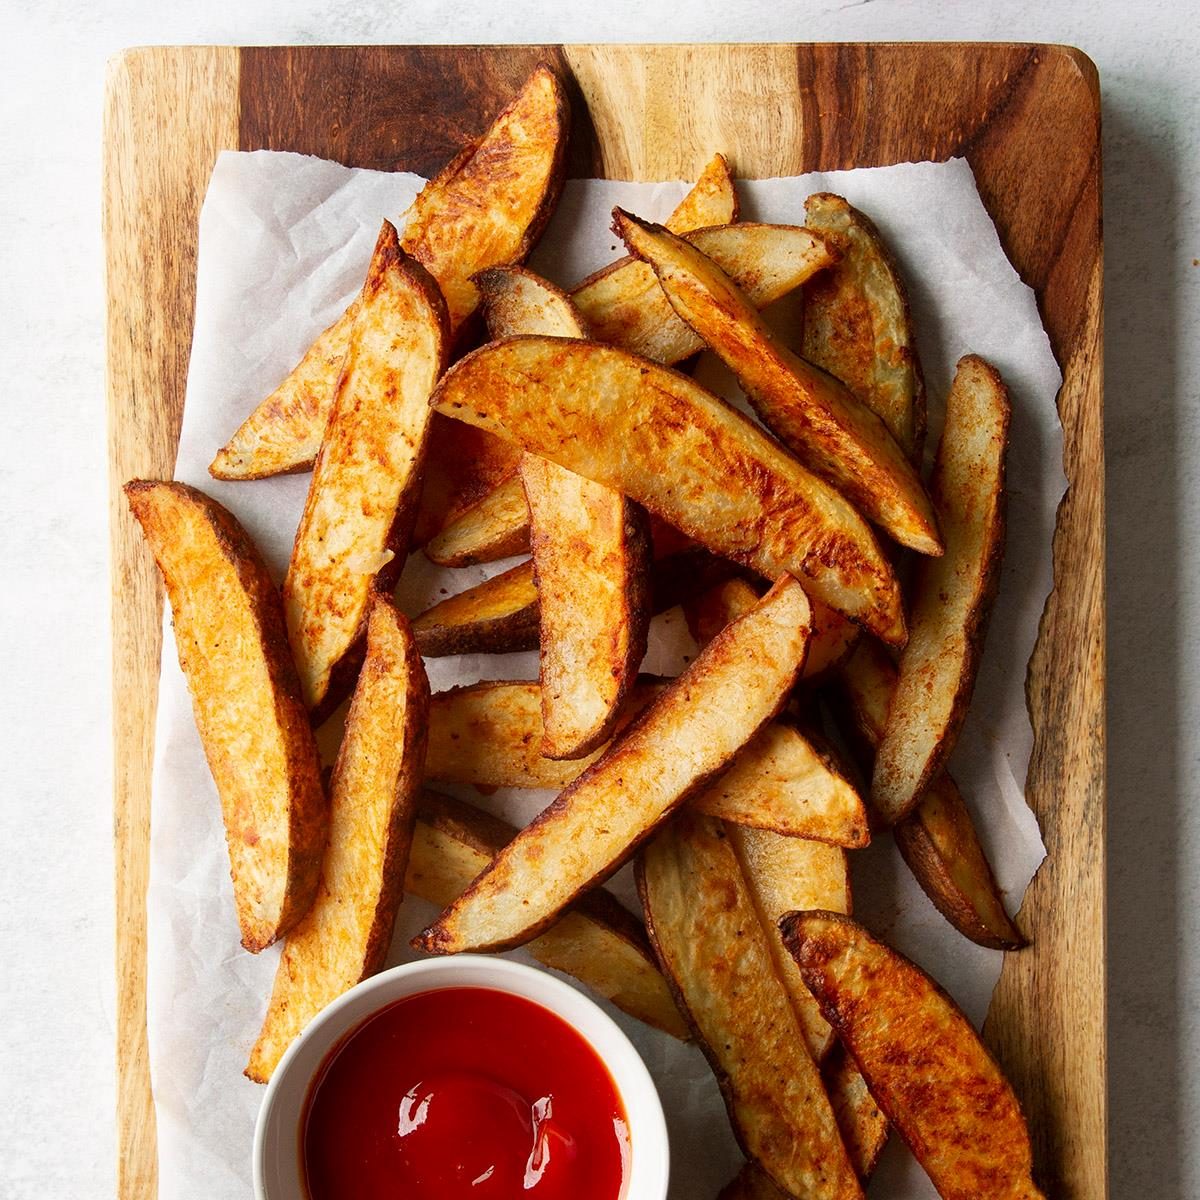 Crispy Baked French Fries [EASY Oven Baked French Fries]